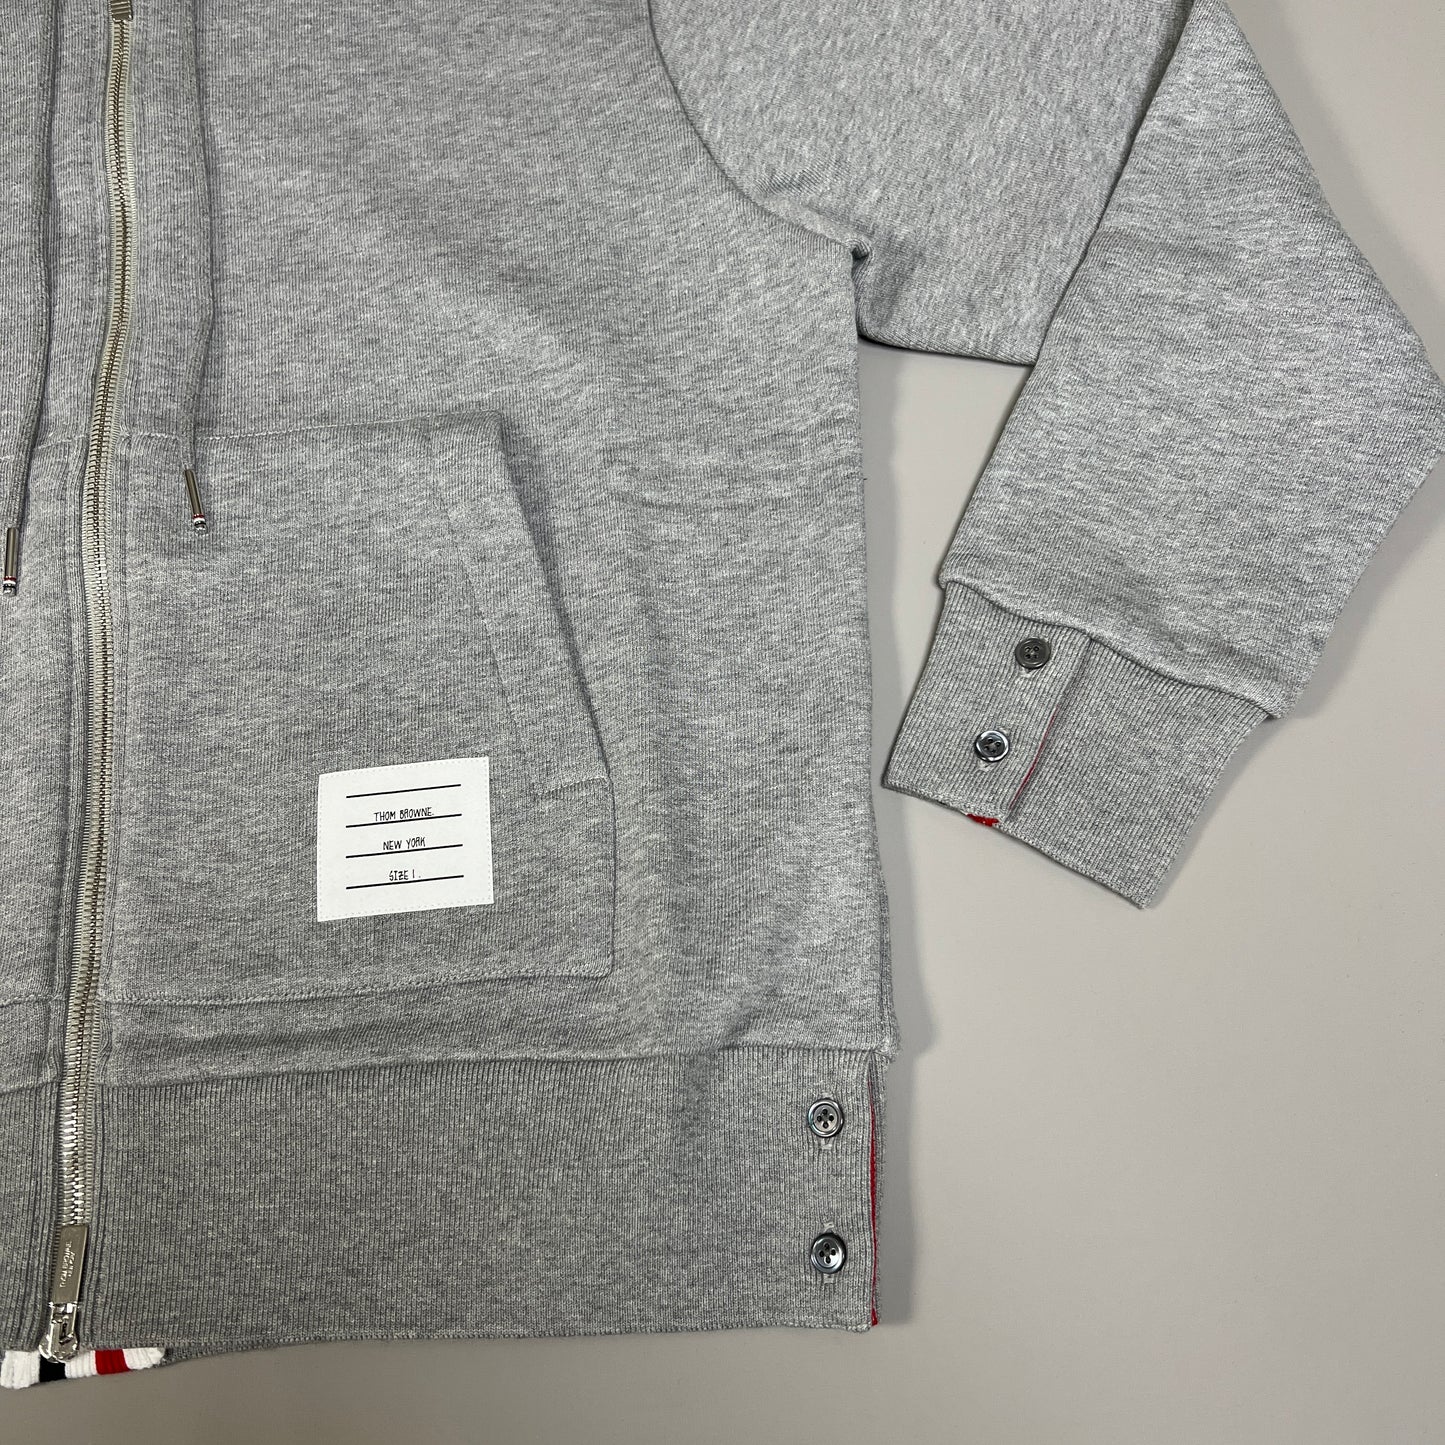 THOM BROWNE Hoodie Zip Up Pullover in Classic Loop Back w/Center Back RWB Stripe Lt Grey Size 1 (New)